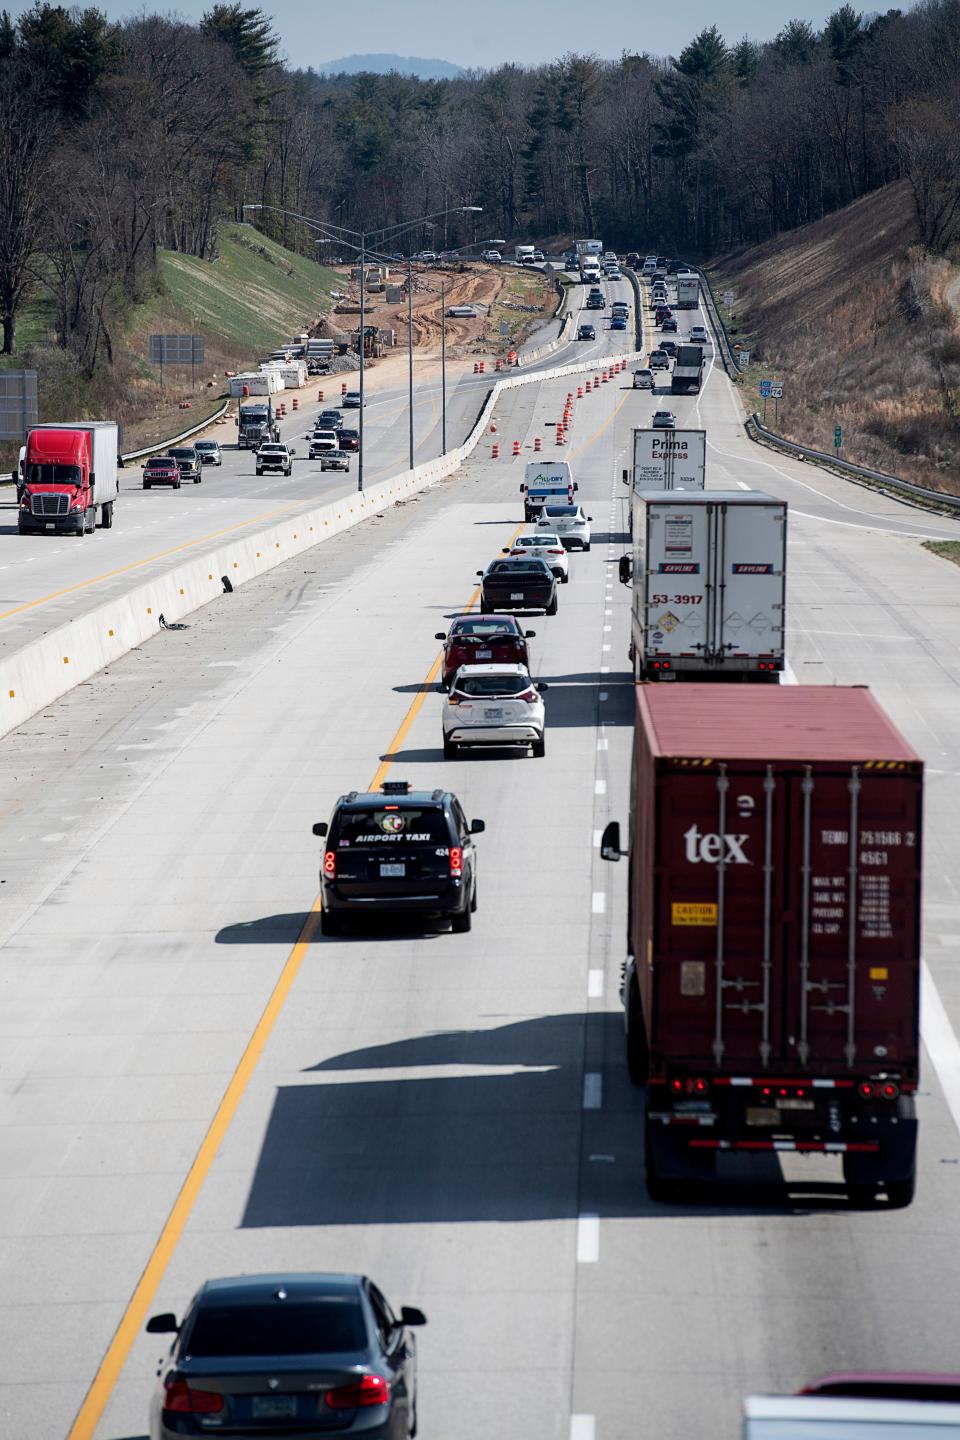 The North Carolina Department of Transportation says that there will be an overnight closure of Interstate 26 West to “allow contract crews to reach a milestone in the construction of a new bridge for the Blue Ridge Parkway over the interstate.”